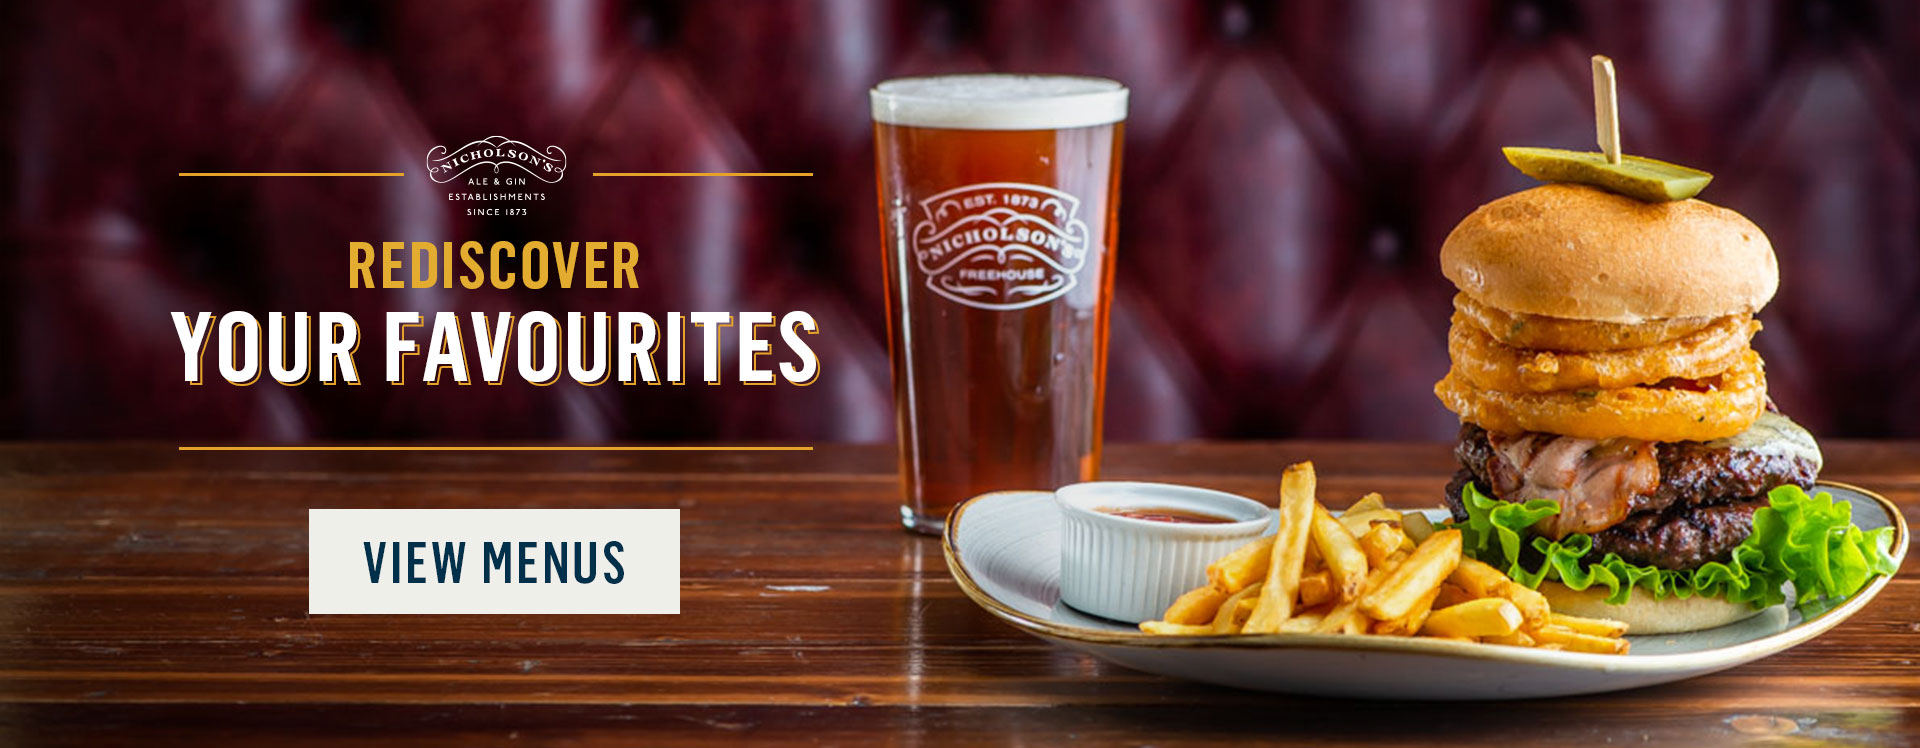 Rediscover your favourites at Marquis Of Granby, Rathbone Street